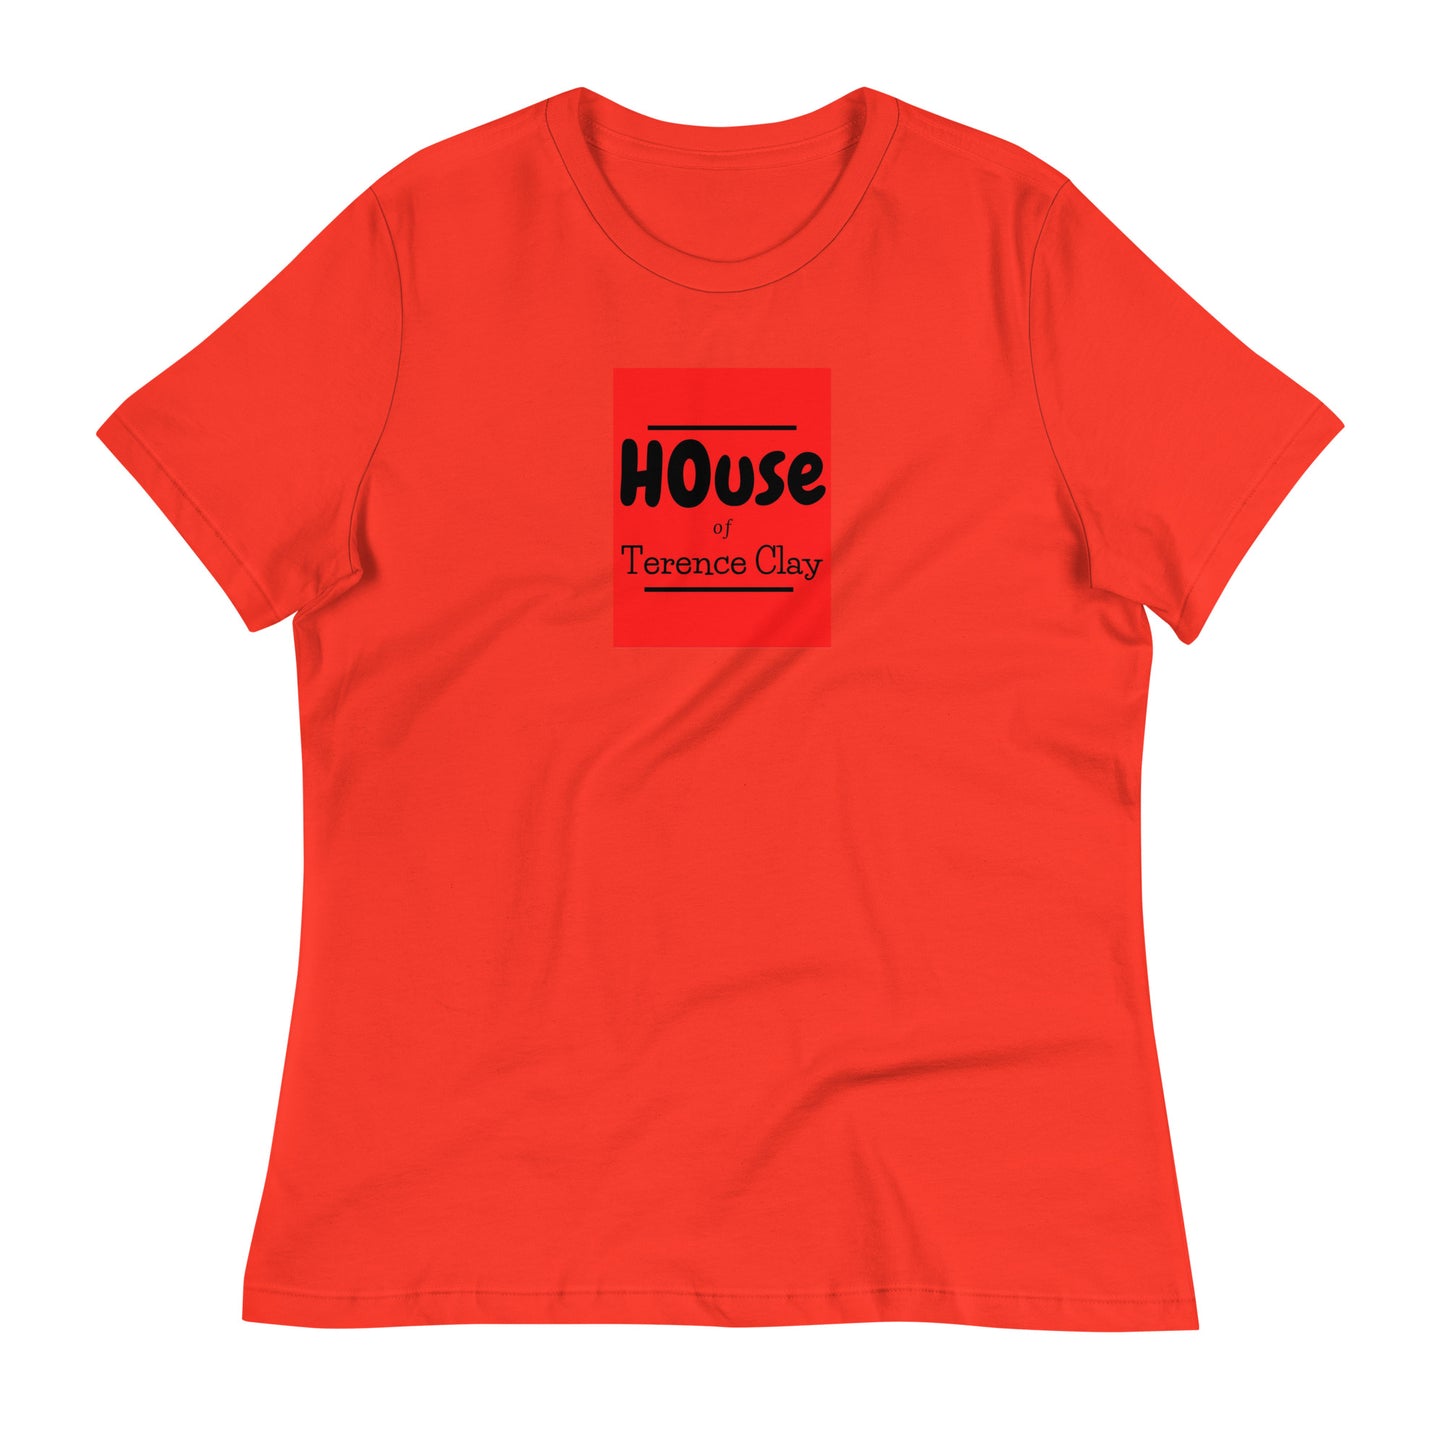 "HOUSE of Terence Clay large red-box Retro Look" Women's Relaxed Shirt